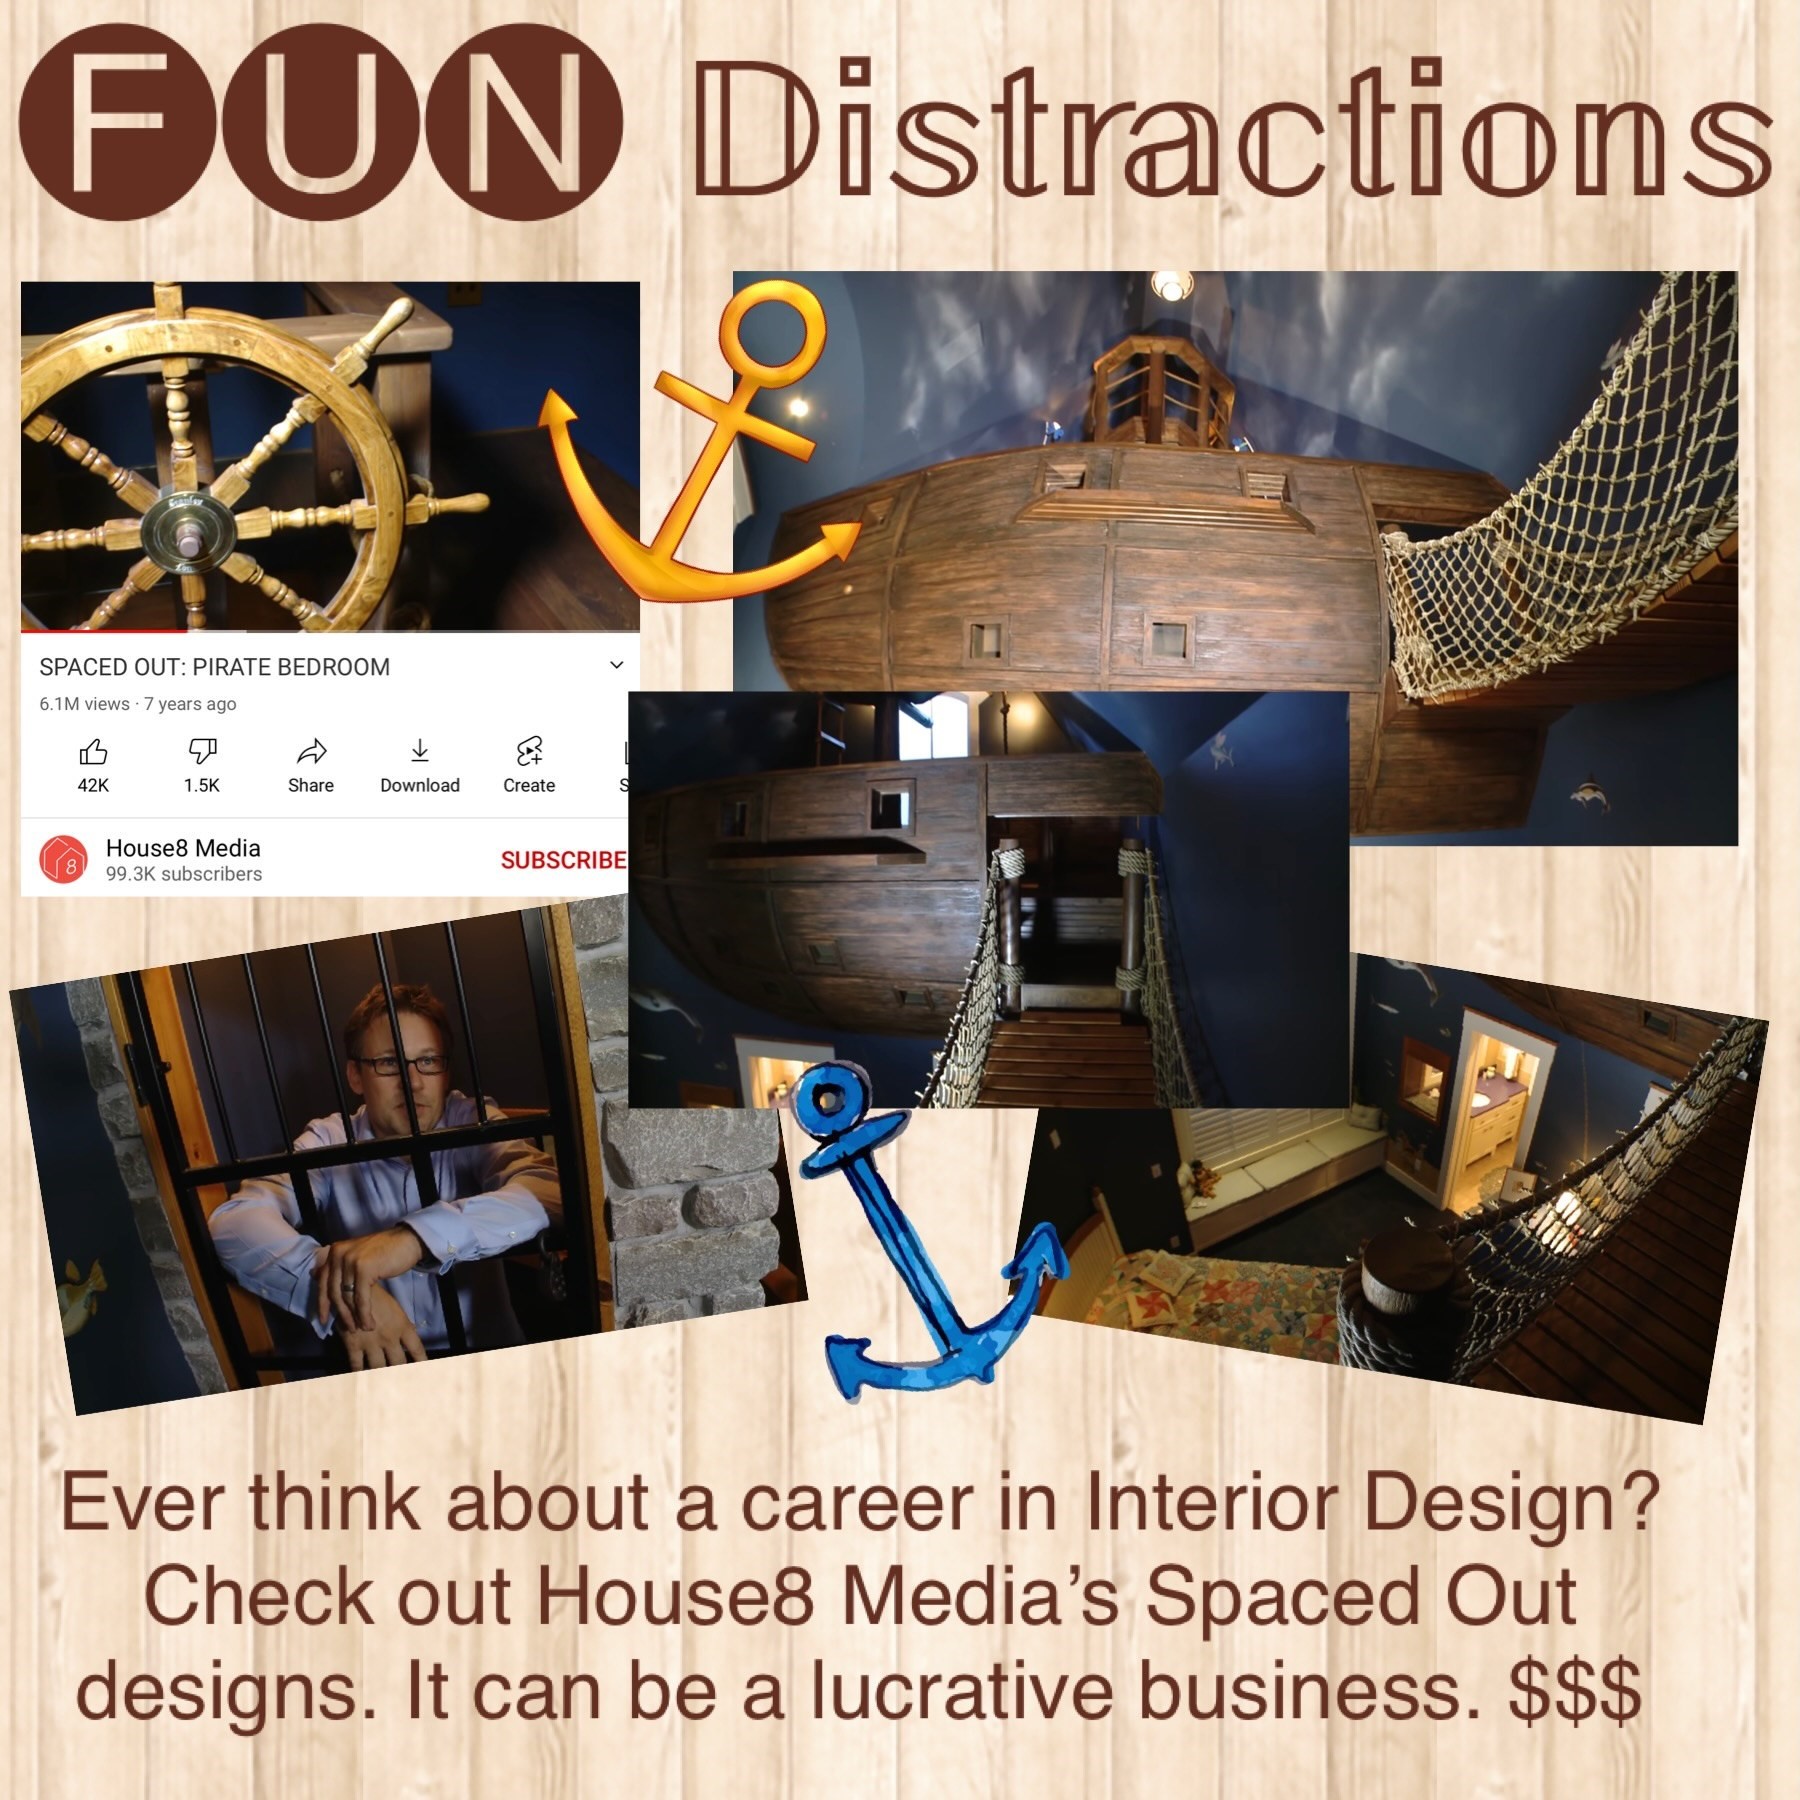 Image showing Pirate themed room from House8 Media & HGTV’s show Spaced Out